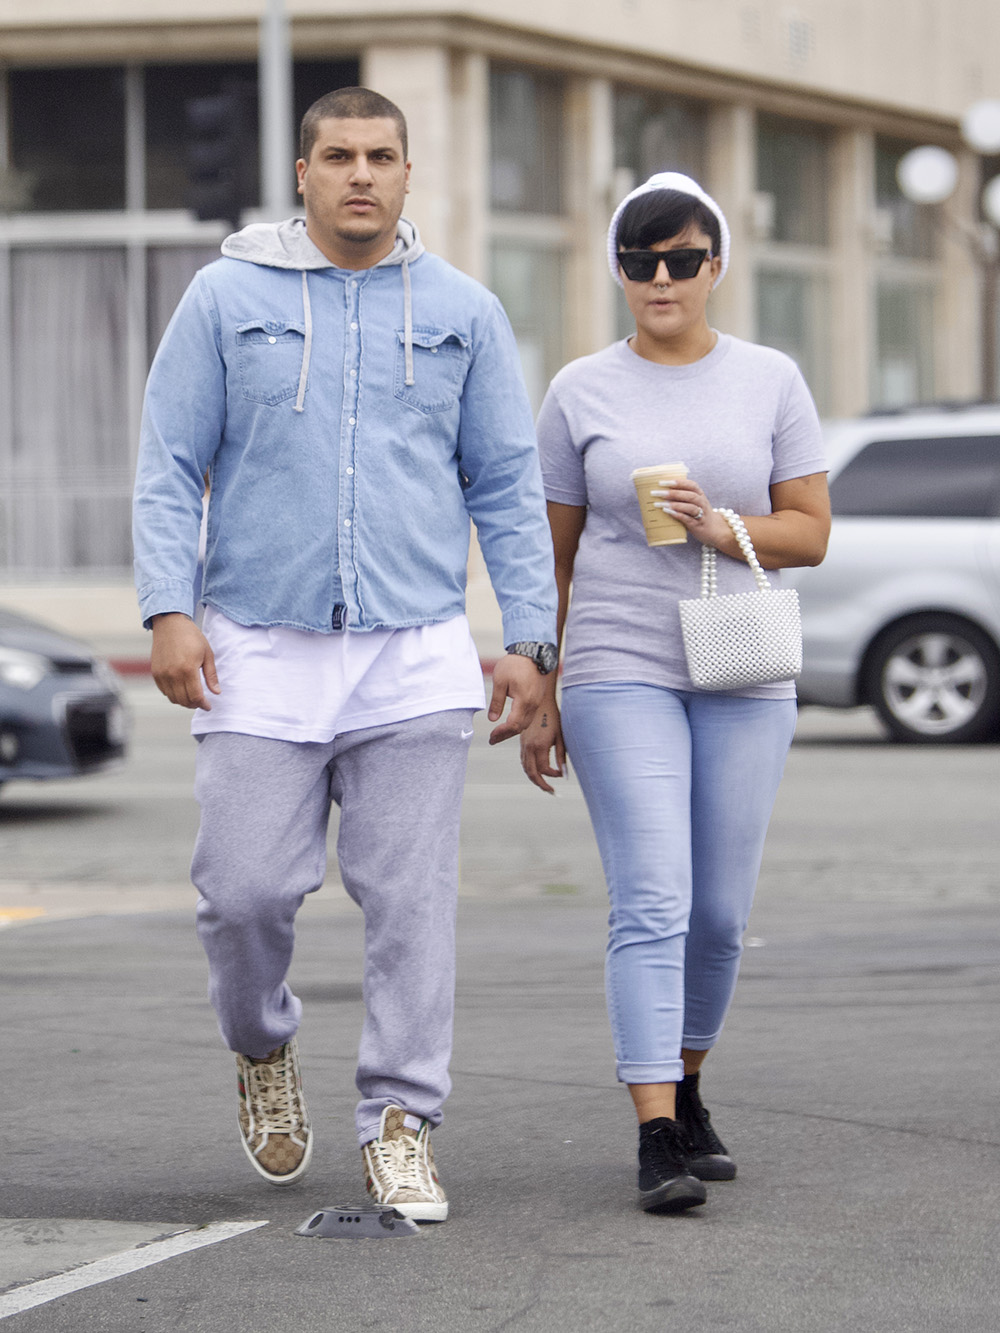 Amanda Bynes reunites with fiancé Paul Michael after cops are called over a domestic dispute Amanda Bynes reunites with fiancé Paul Michael after cops been called in for a domestic dispute, Los Angeles, California, USA - April 28, 2022